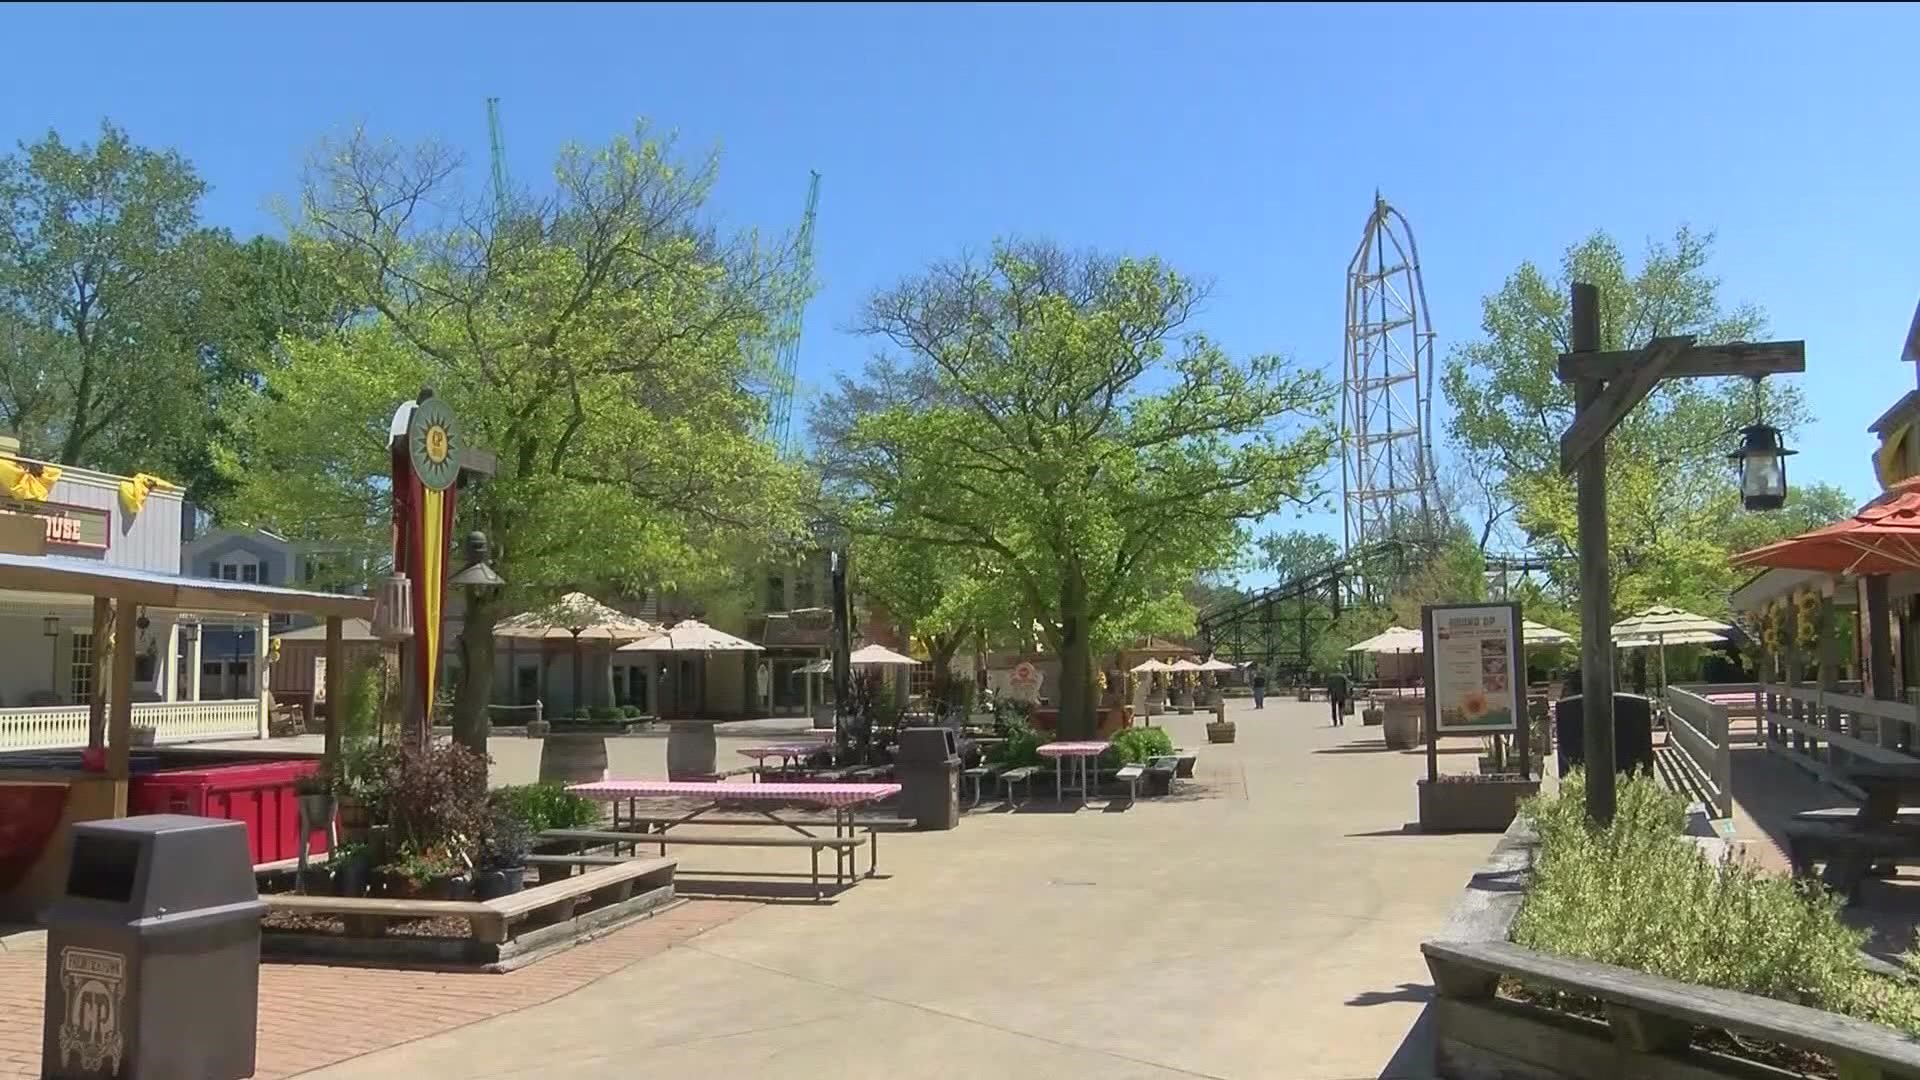 A lawsuit argued Cedar Point was on the hook for prorated refunds during the COVID-19 pandemic when the park was shut down.